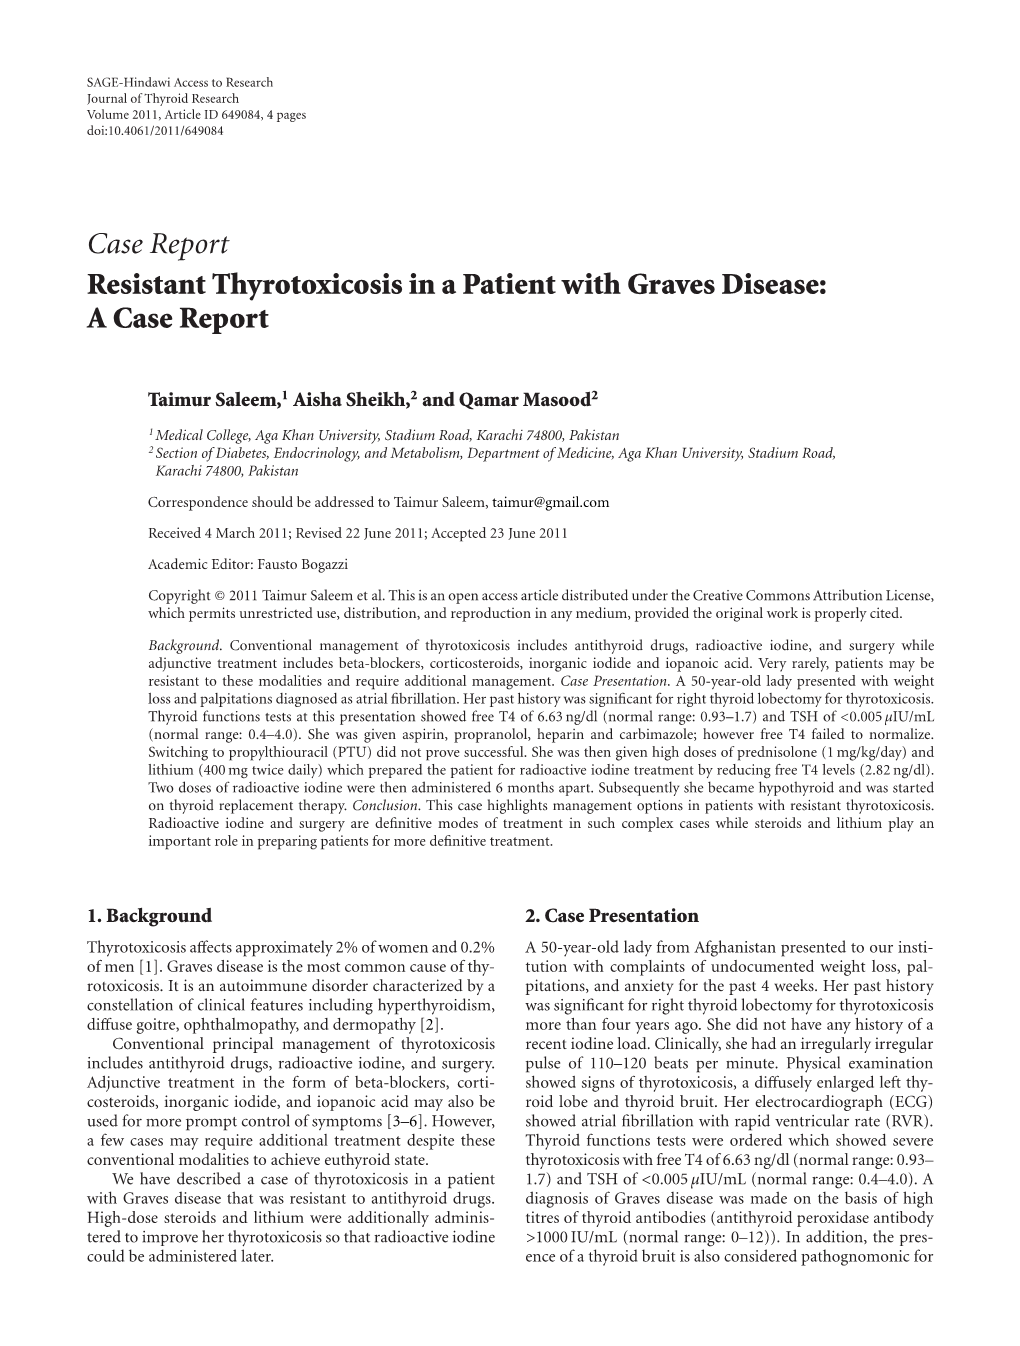 Resistant Thyrotoxicosis in a Patient with Graves Disease: a Case Report